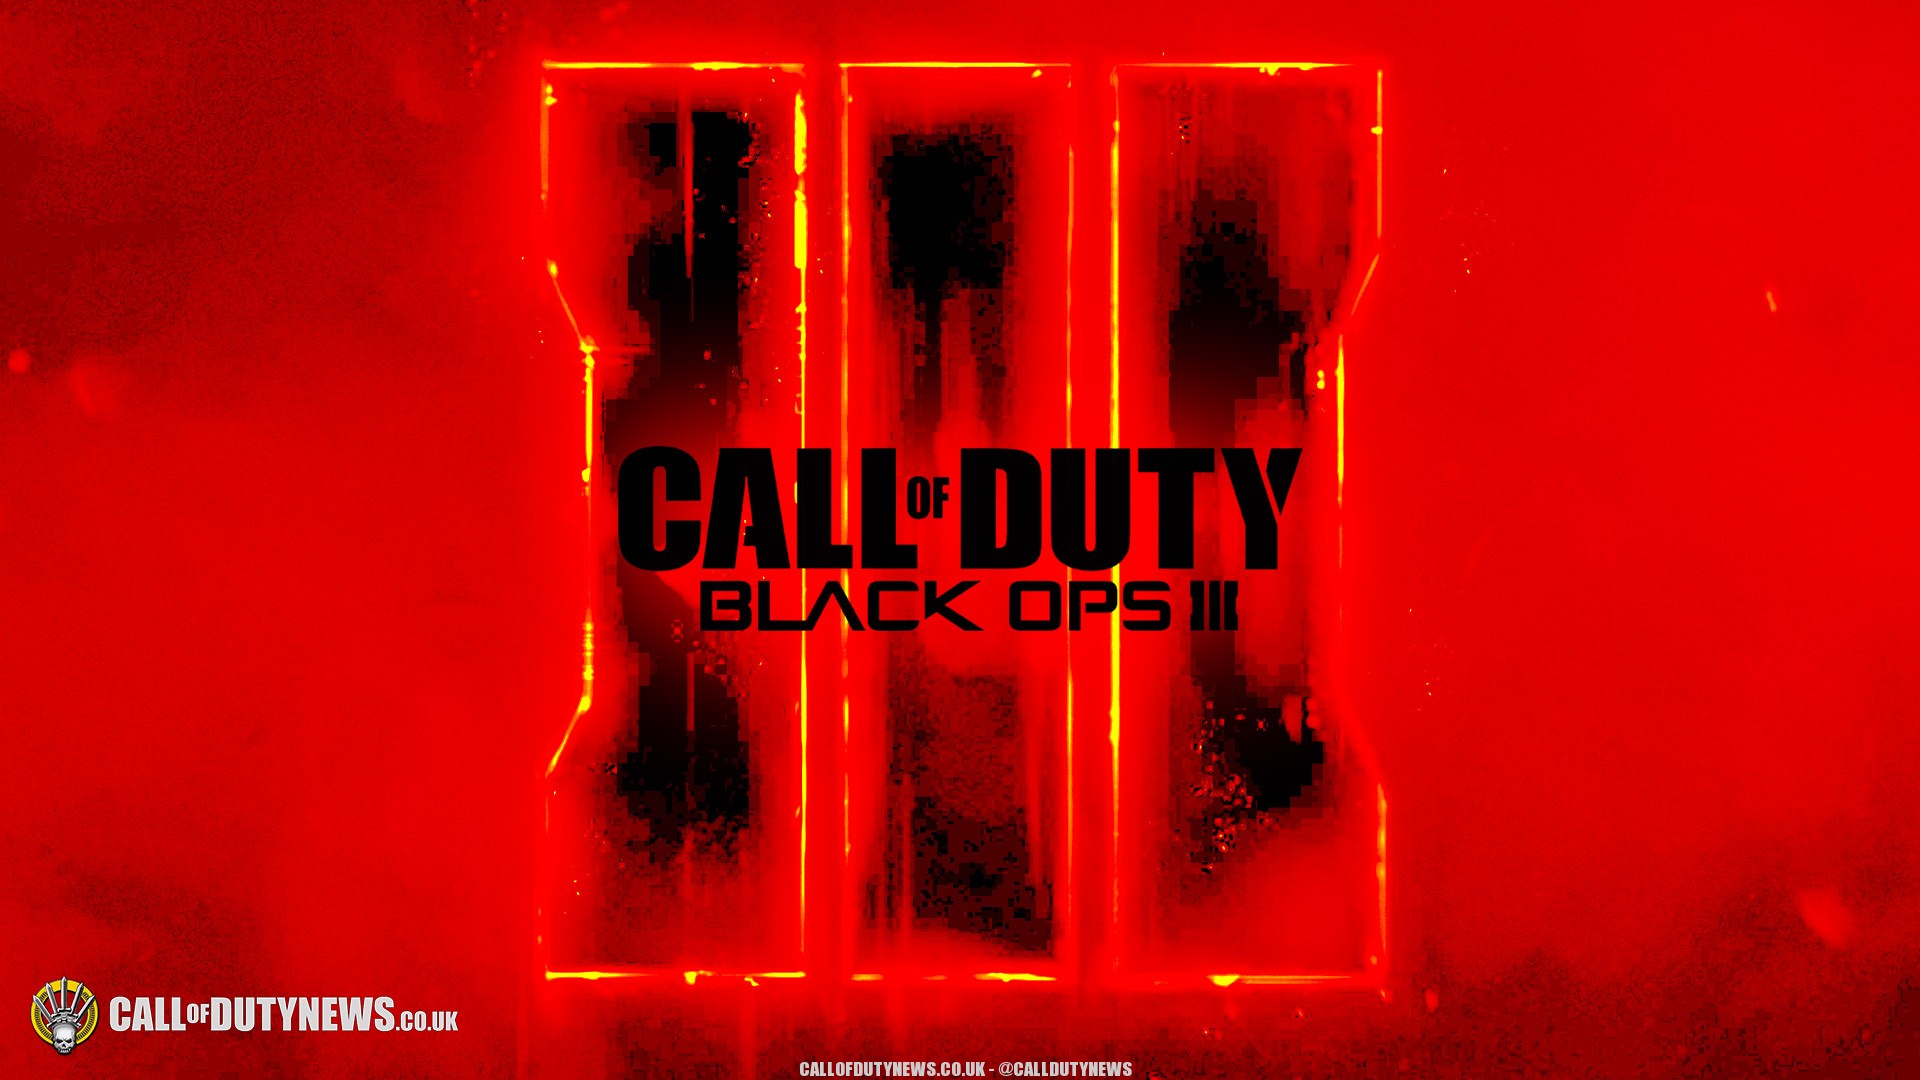 Enjoy these 1080p HD Black Ops wallpapers by callofdutyblogcom